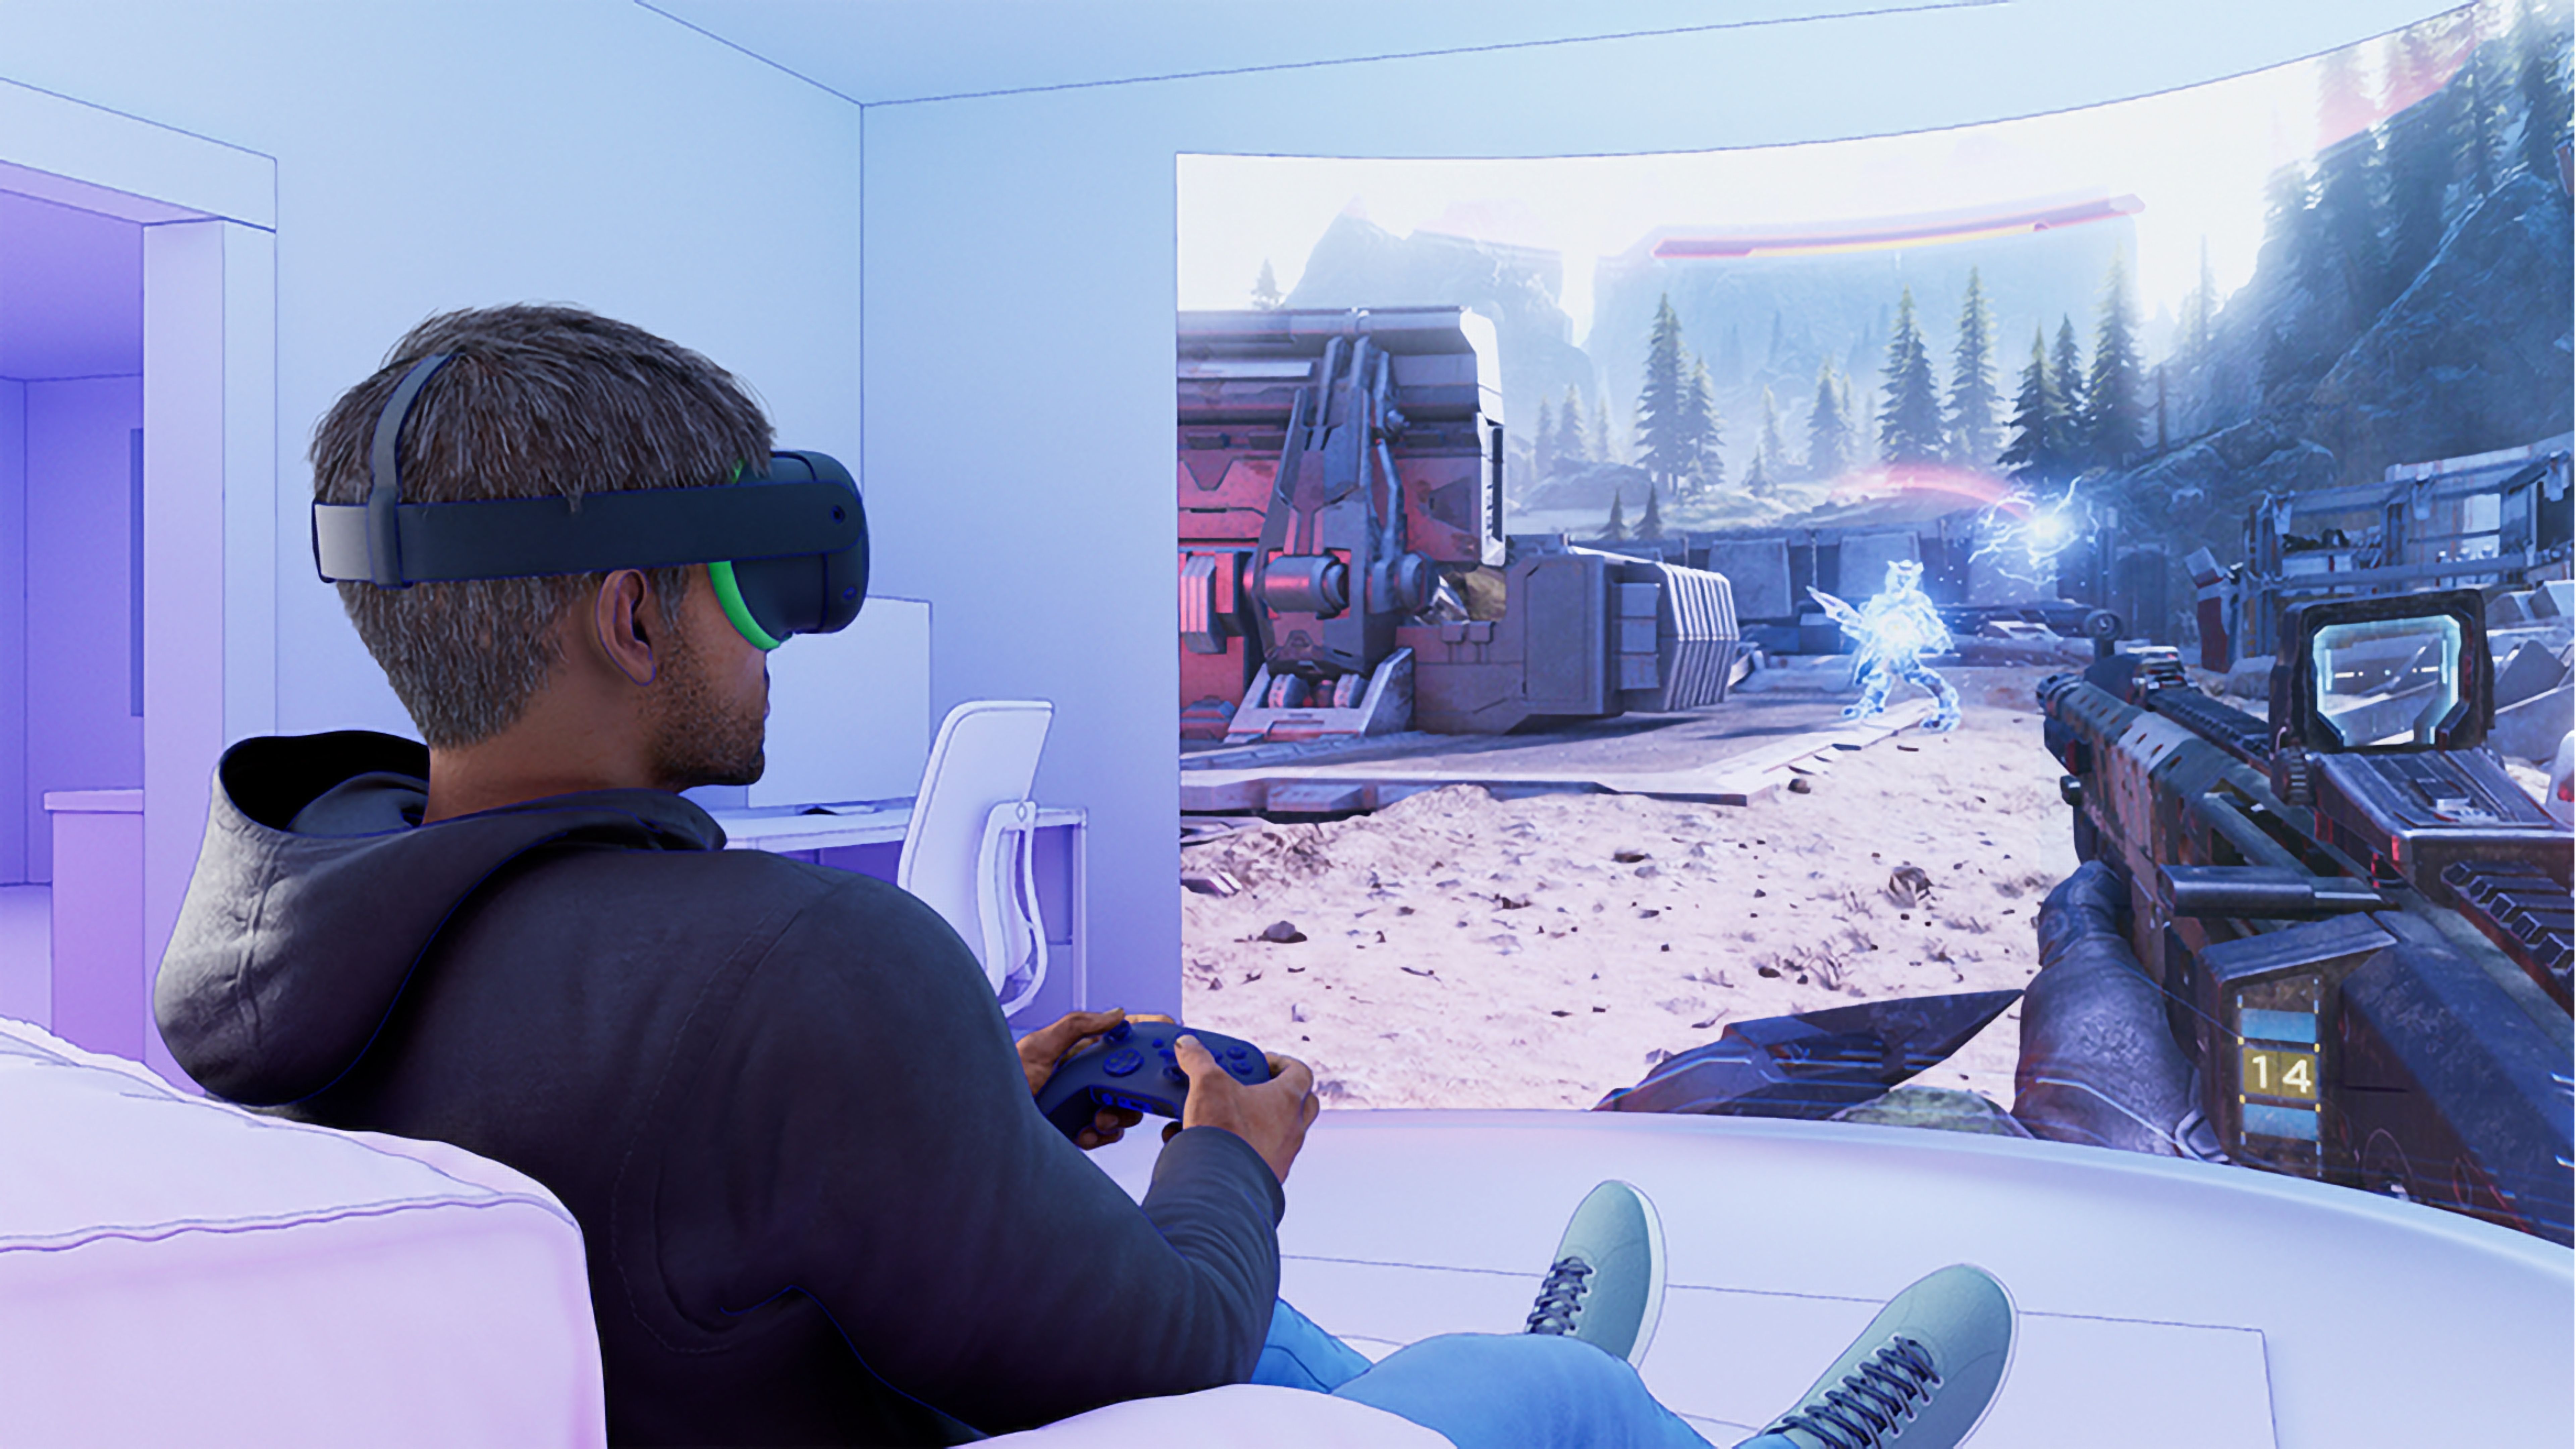 Meta's visualization of a mixed reality headset being used to play streamed Xbox games.